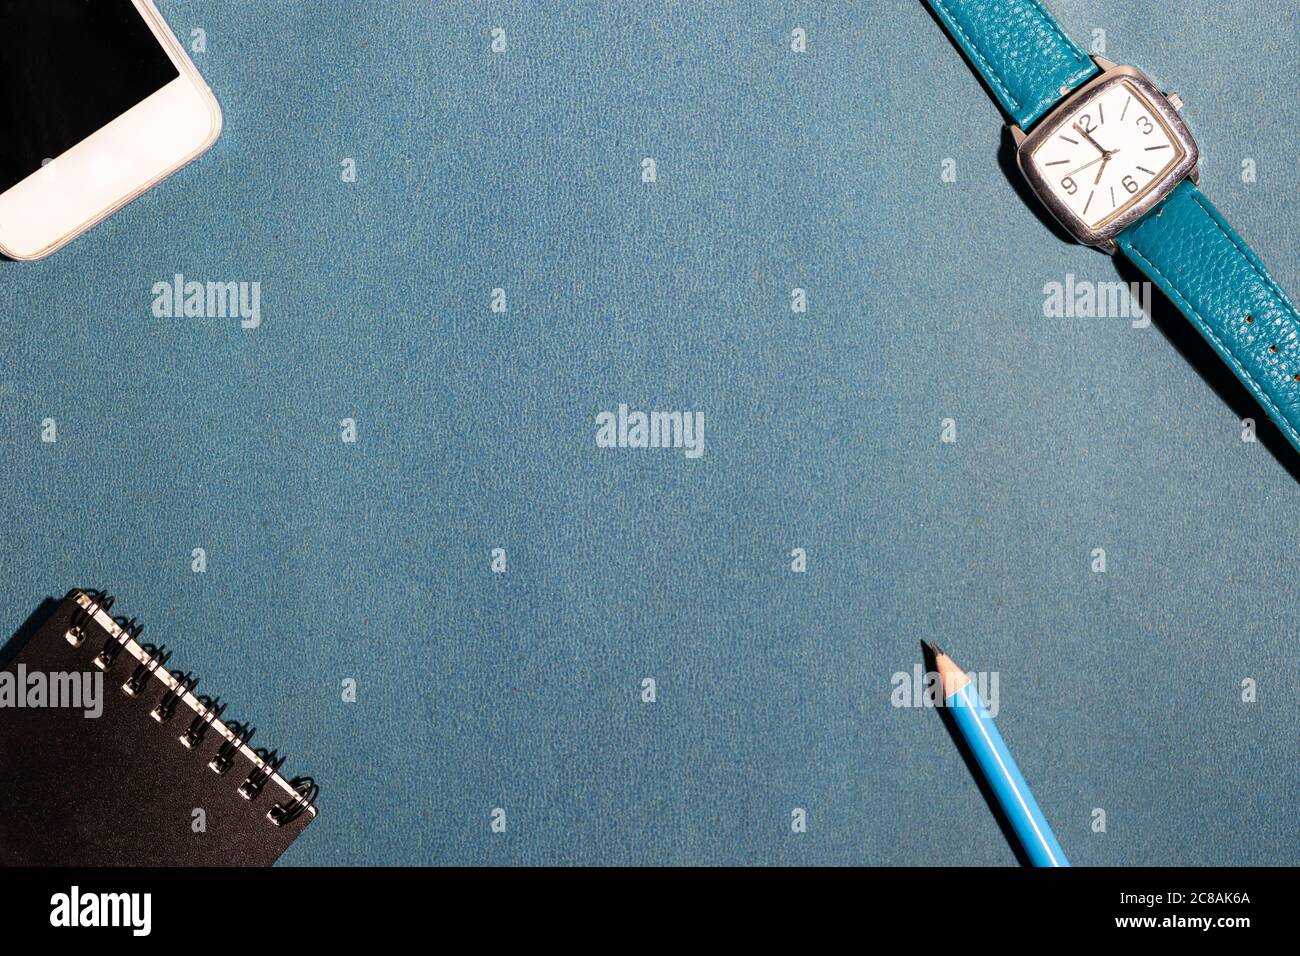 Pencil, smartphone, watch and a small notebook on the four corners of a  blue surface Stock Photo